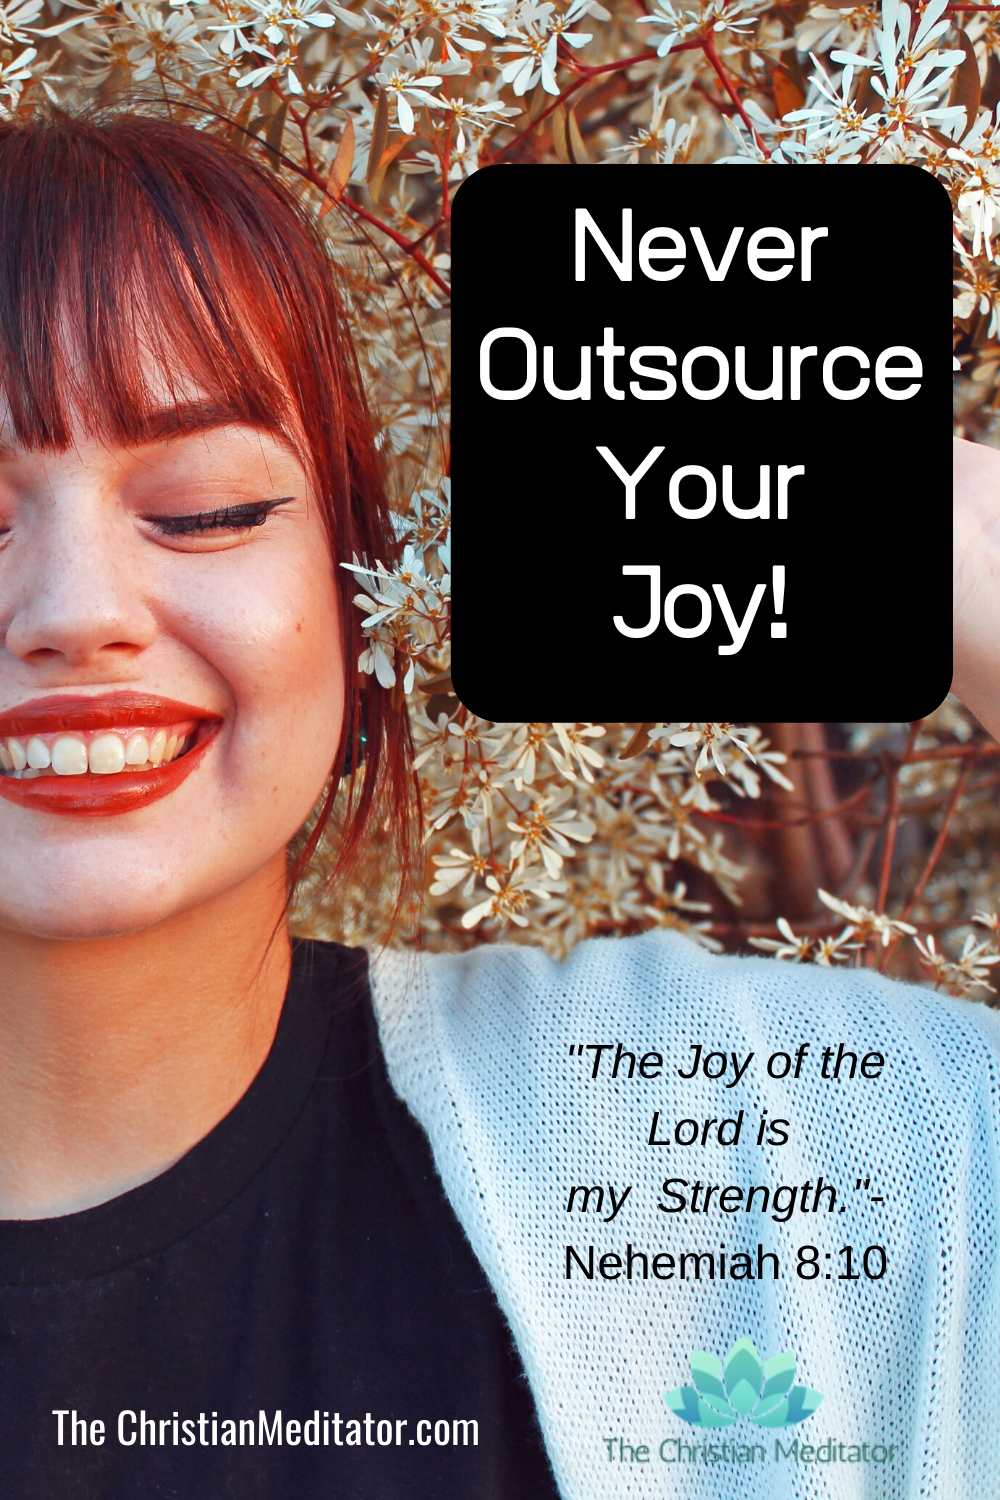 Stop outsourcing your joy